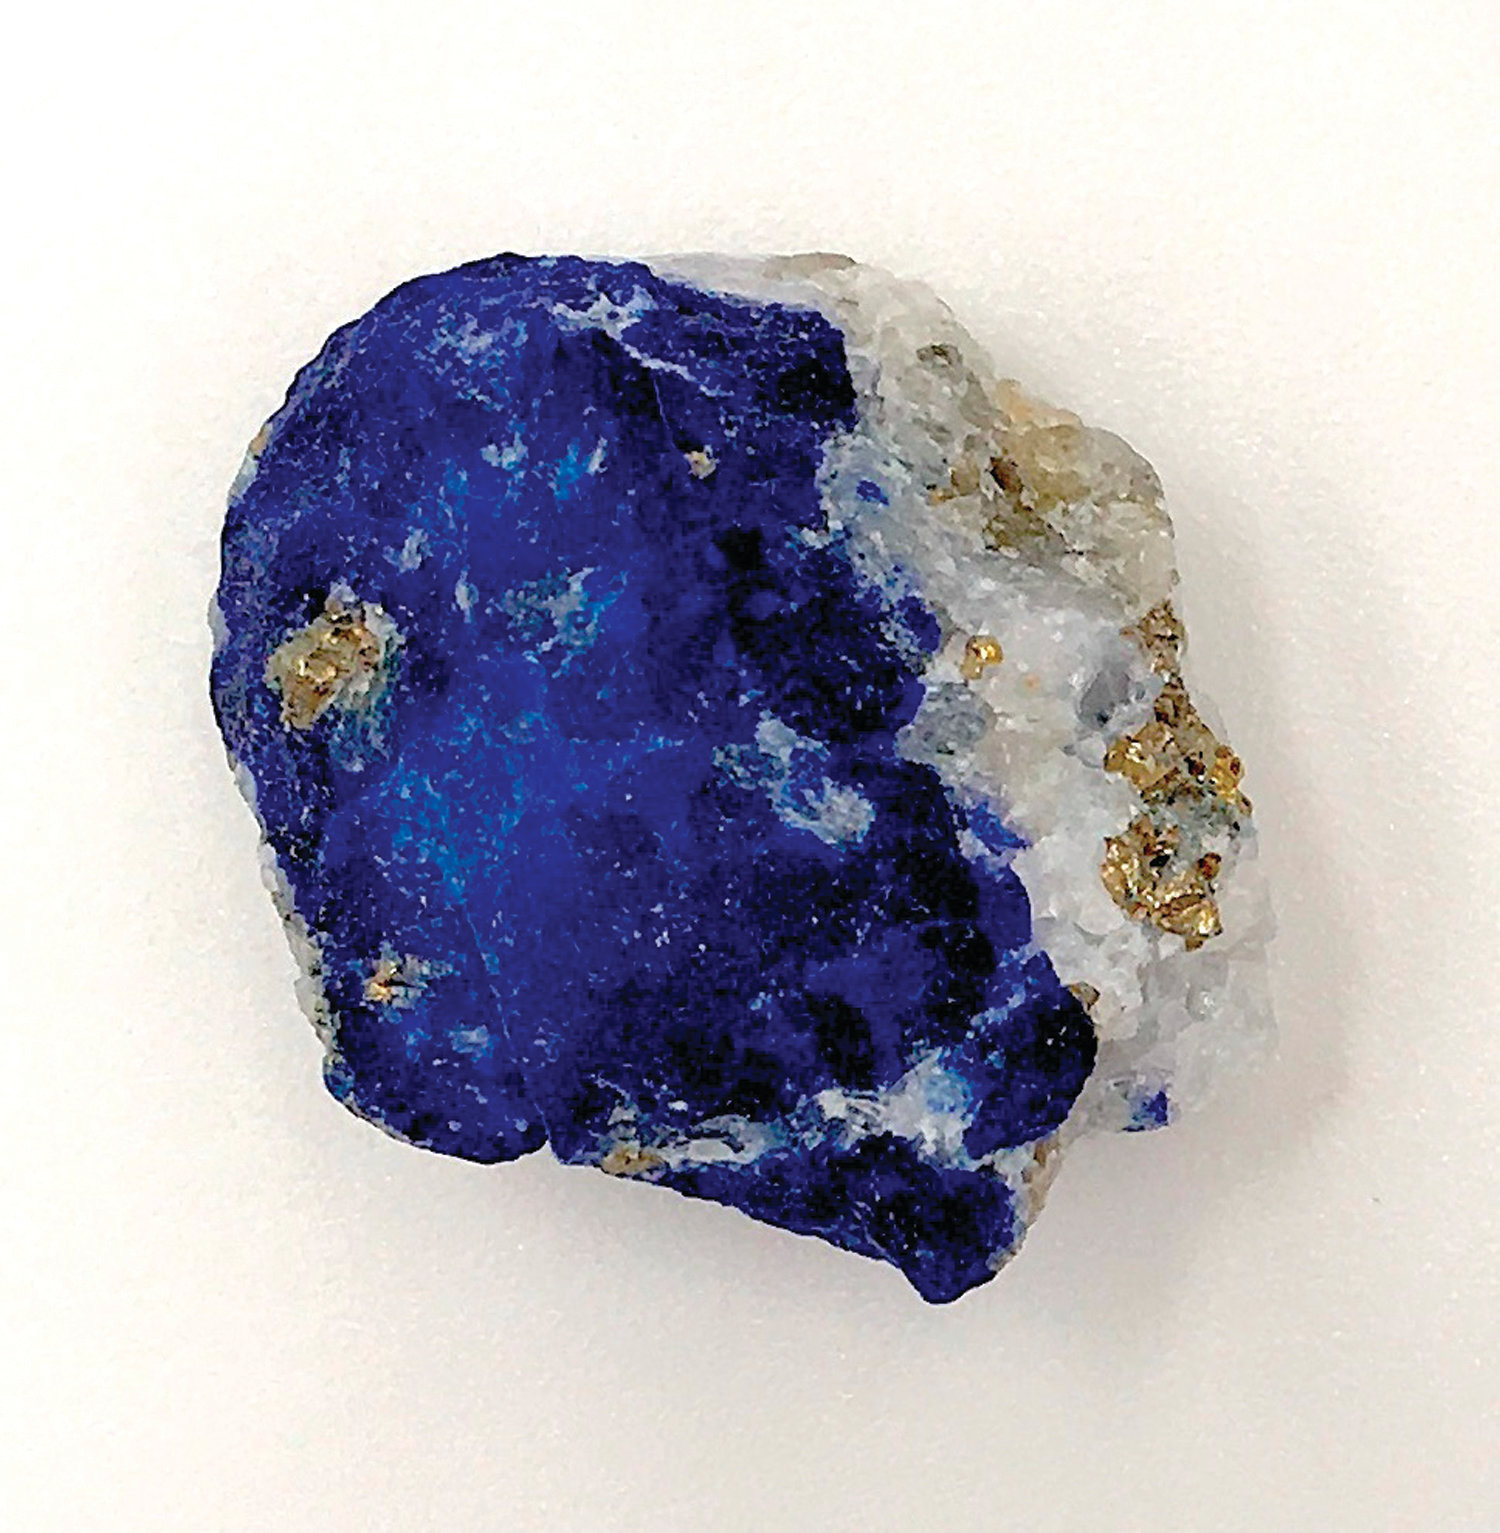 Christina Warinner / Max Planck Institute for the Science of Human History via APSeen is a piece of lapis lazuli. During the European Middle Ages, Afghanistan was the only known source of the rare blue stone which at the time was ground up and used as a pigment. Modern-day scientists who examined the 1,000 year-old remains of a middle-aged woman in Germany discovered the semi-precious stone in the tartar on her teeth. From that, they concluded the woman was an artist involved in creating illuminated manuscripts, a task usually associated with monks.